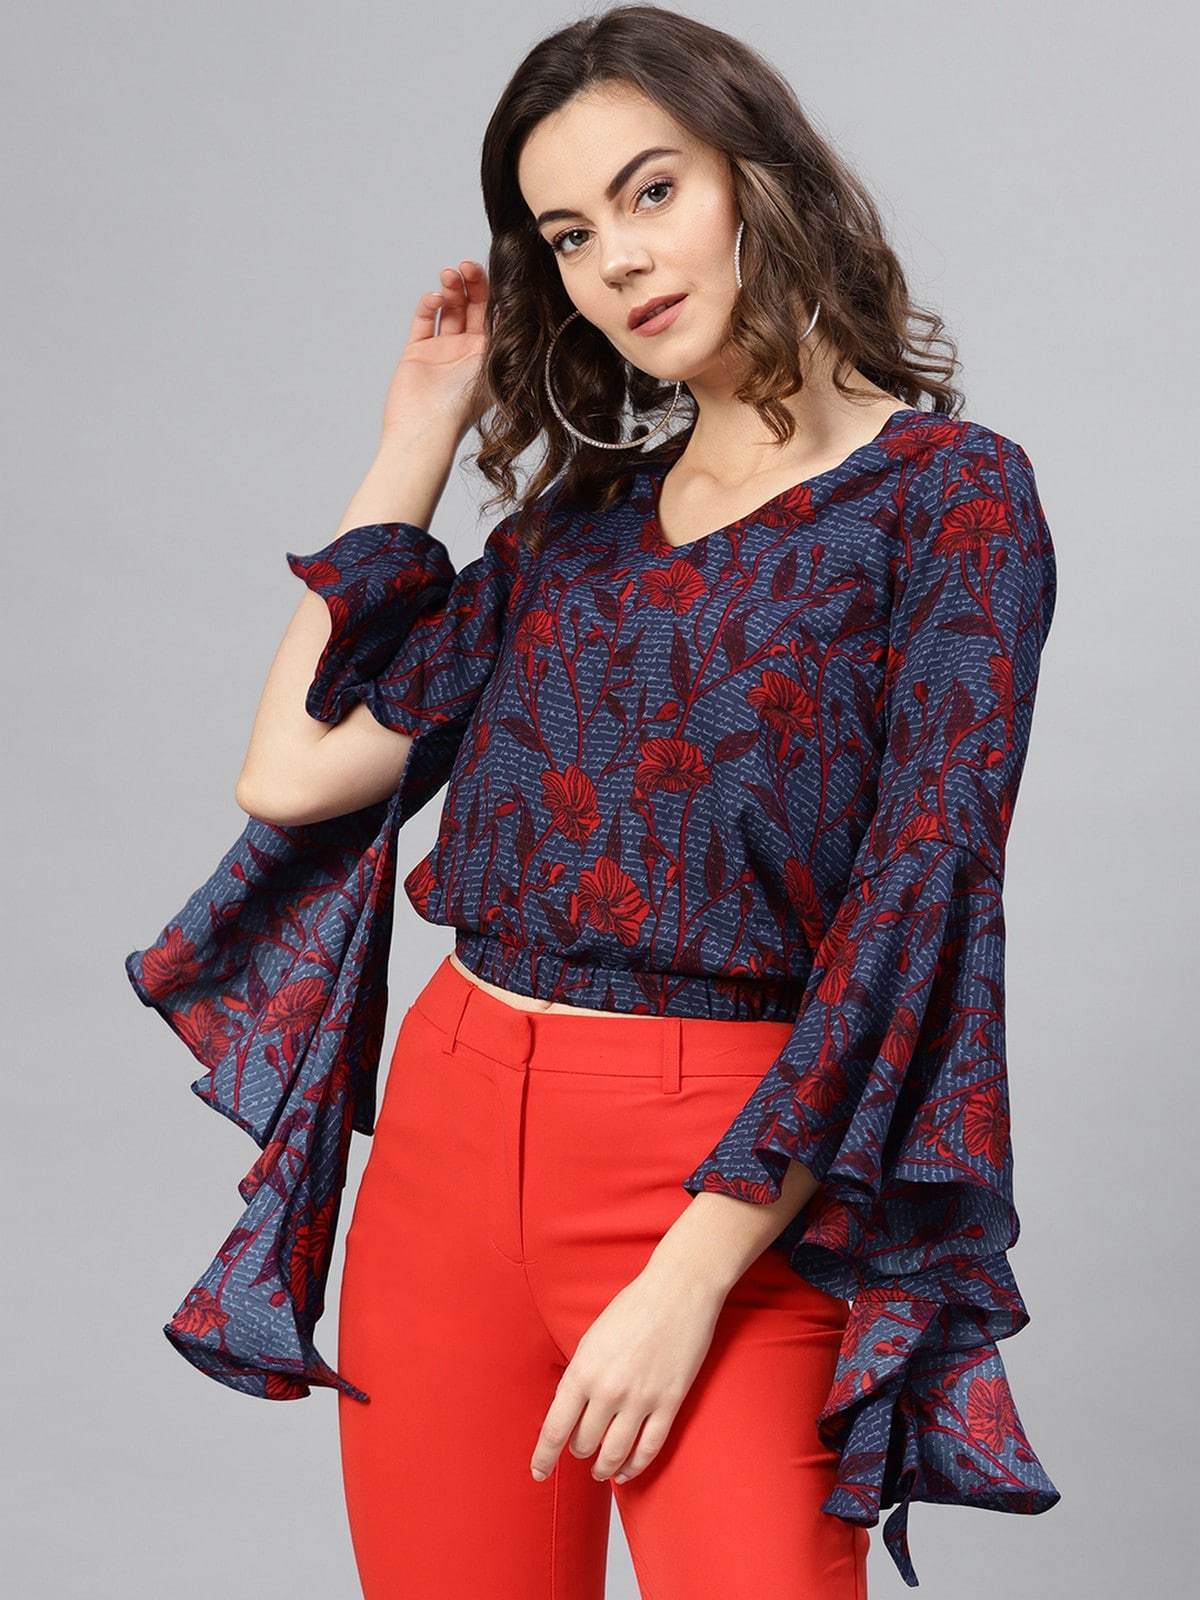 Women's Floral Printed Top - Pannkh